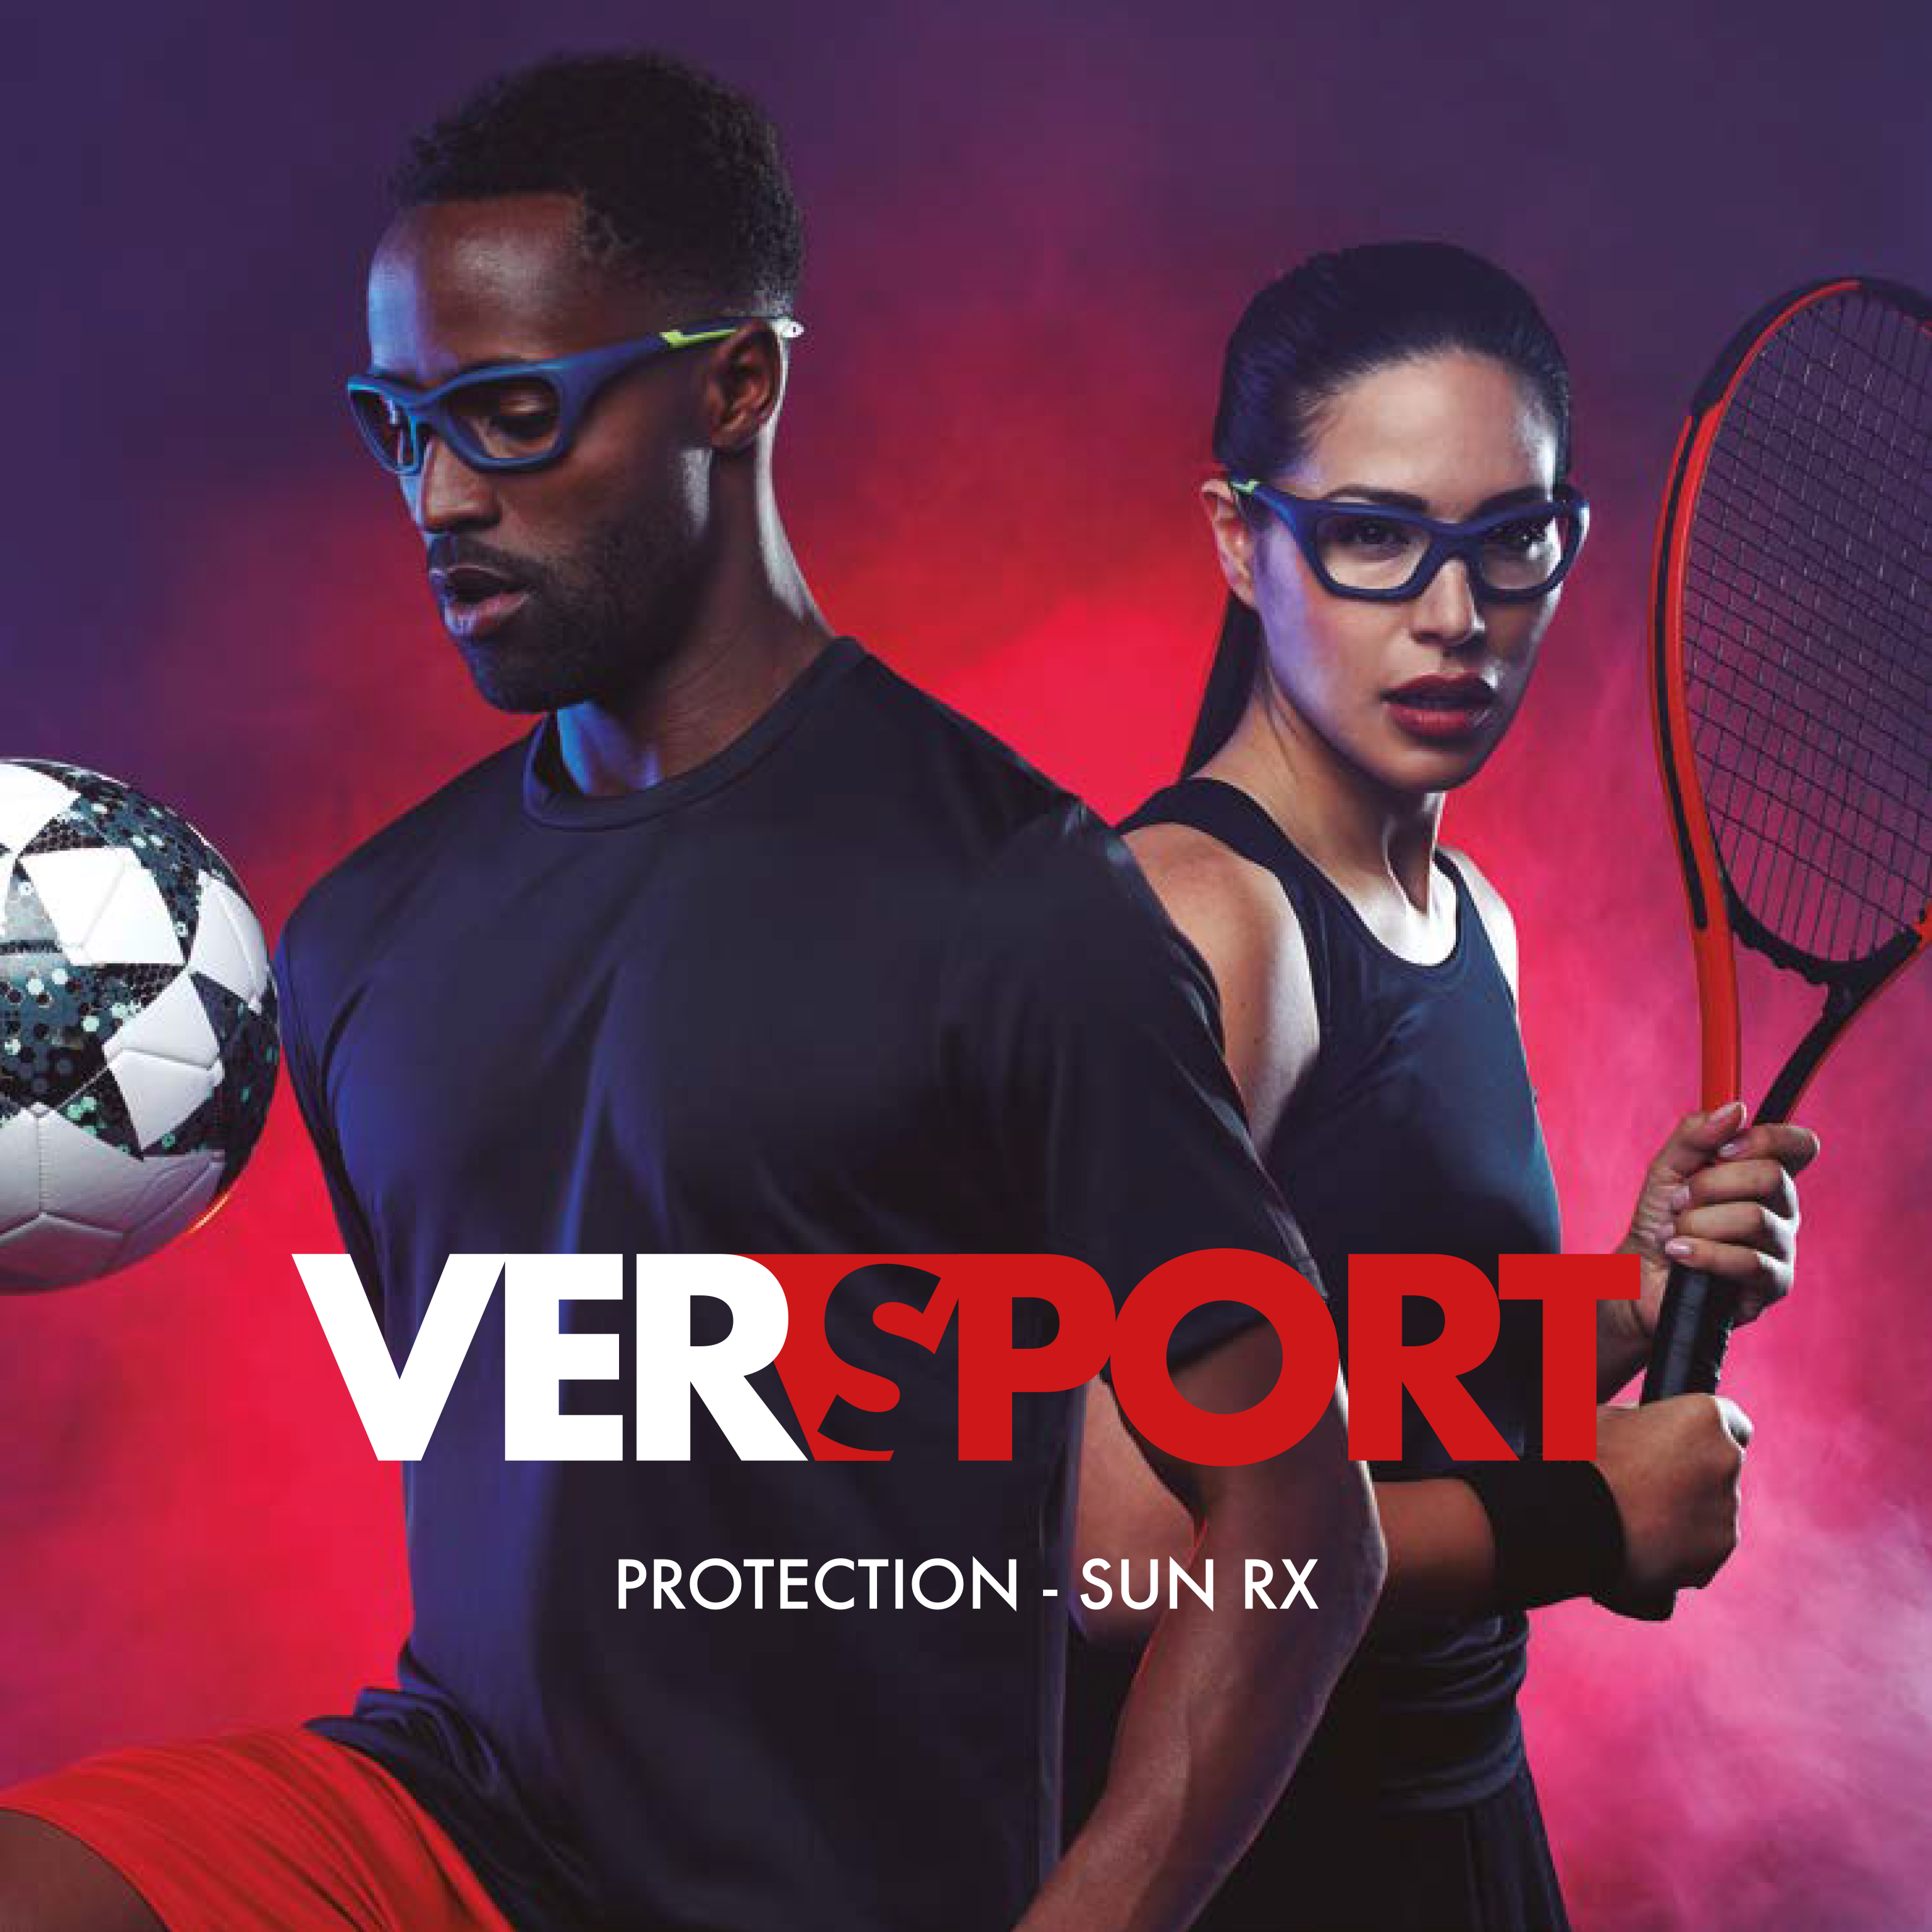 VR_sport products